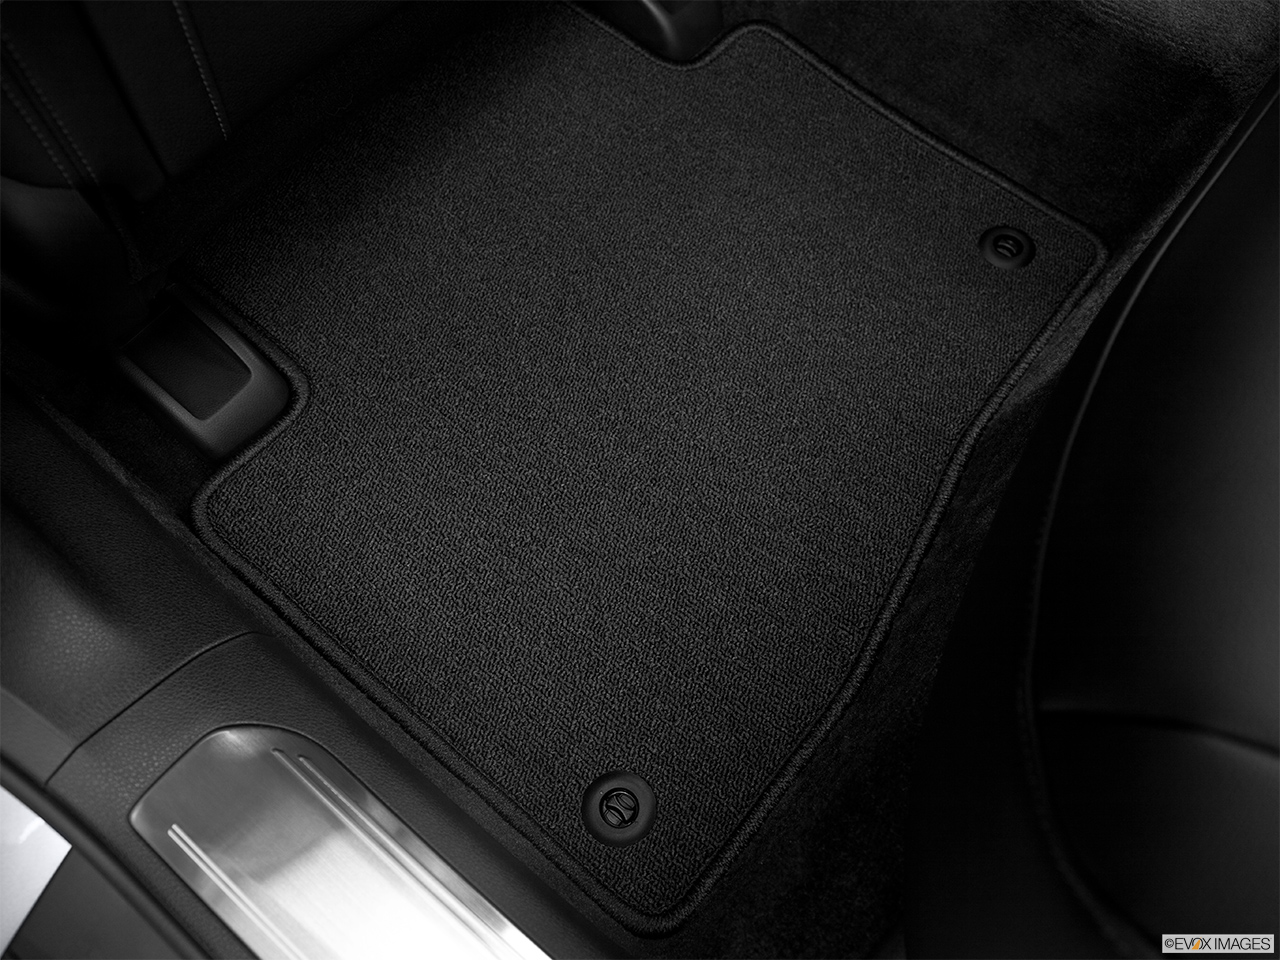 2014 Acura RLX Base Rear driver's side floor mat. Mid-seat level from outside looking in. 